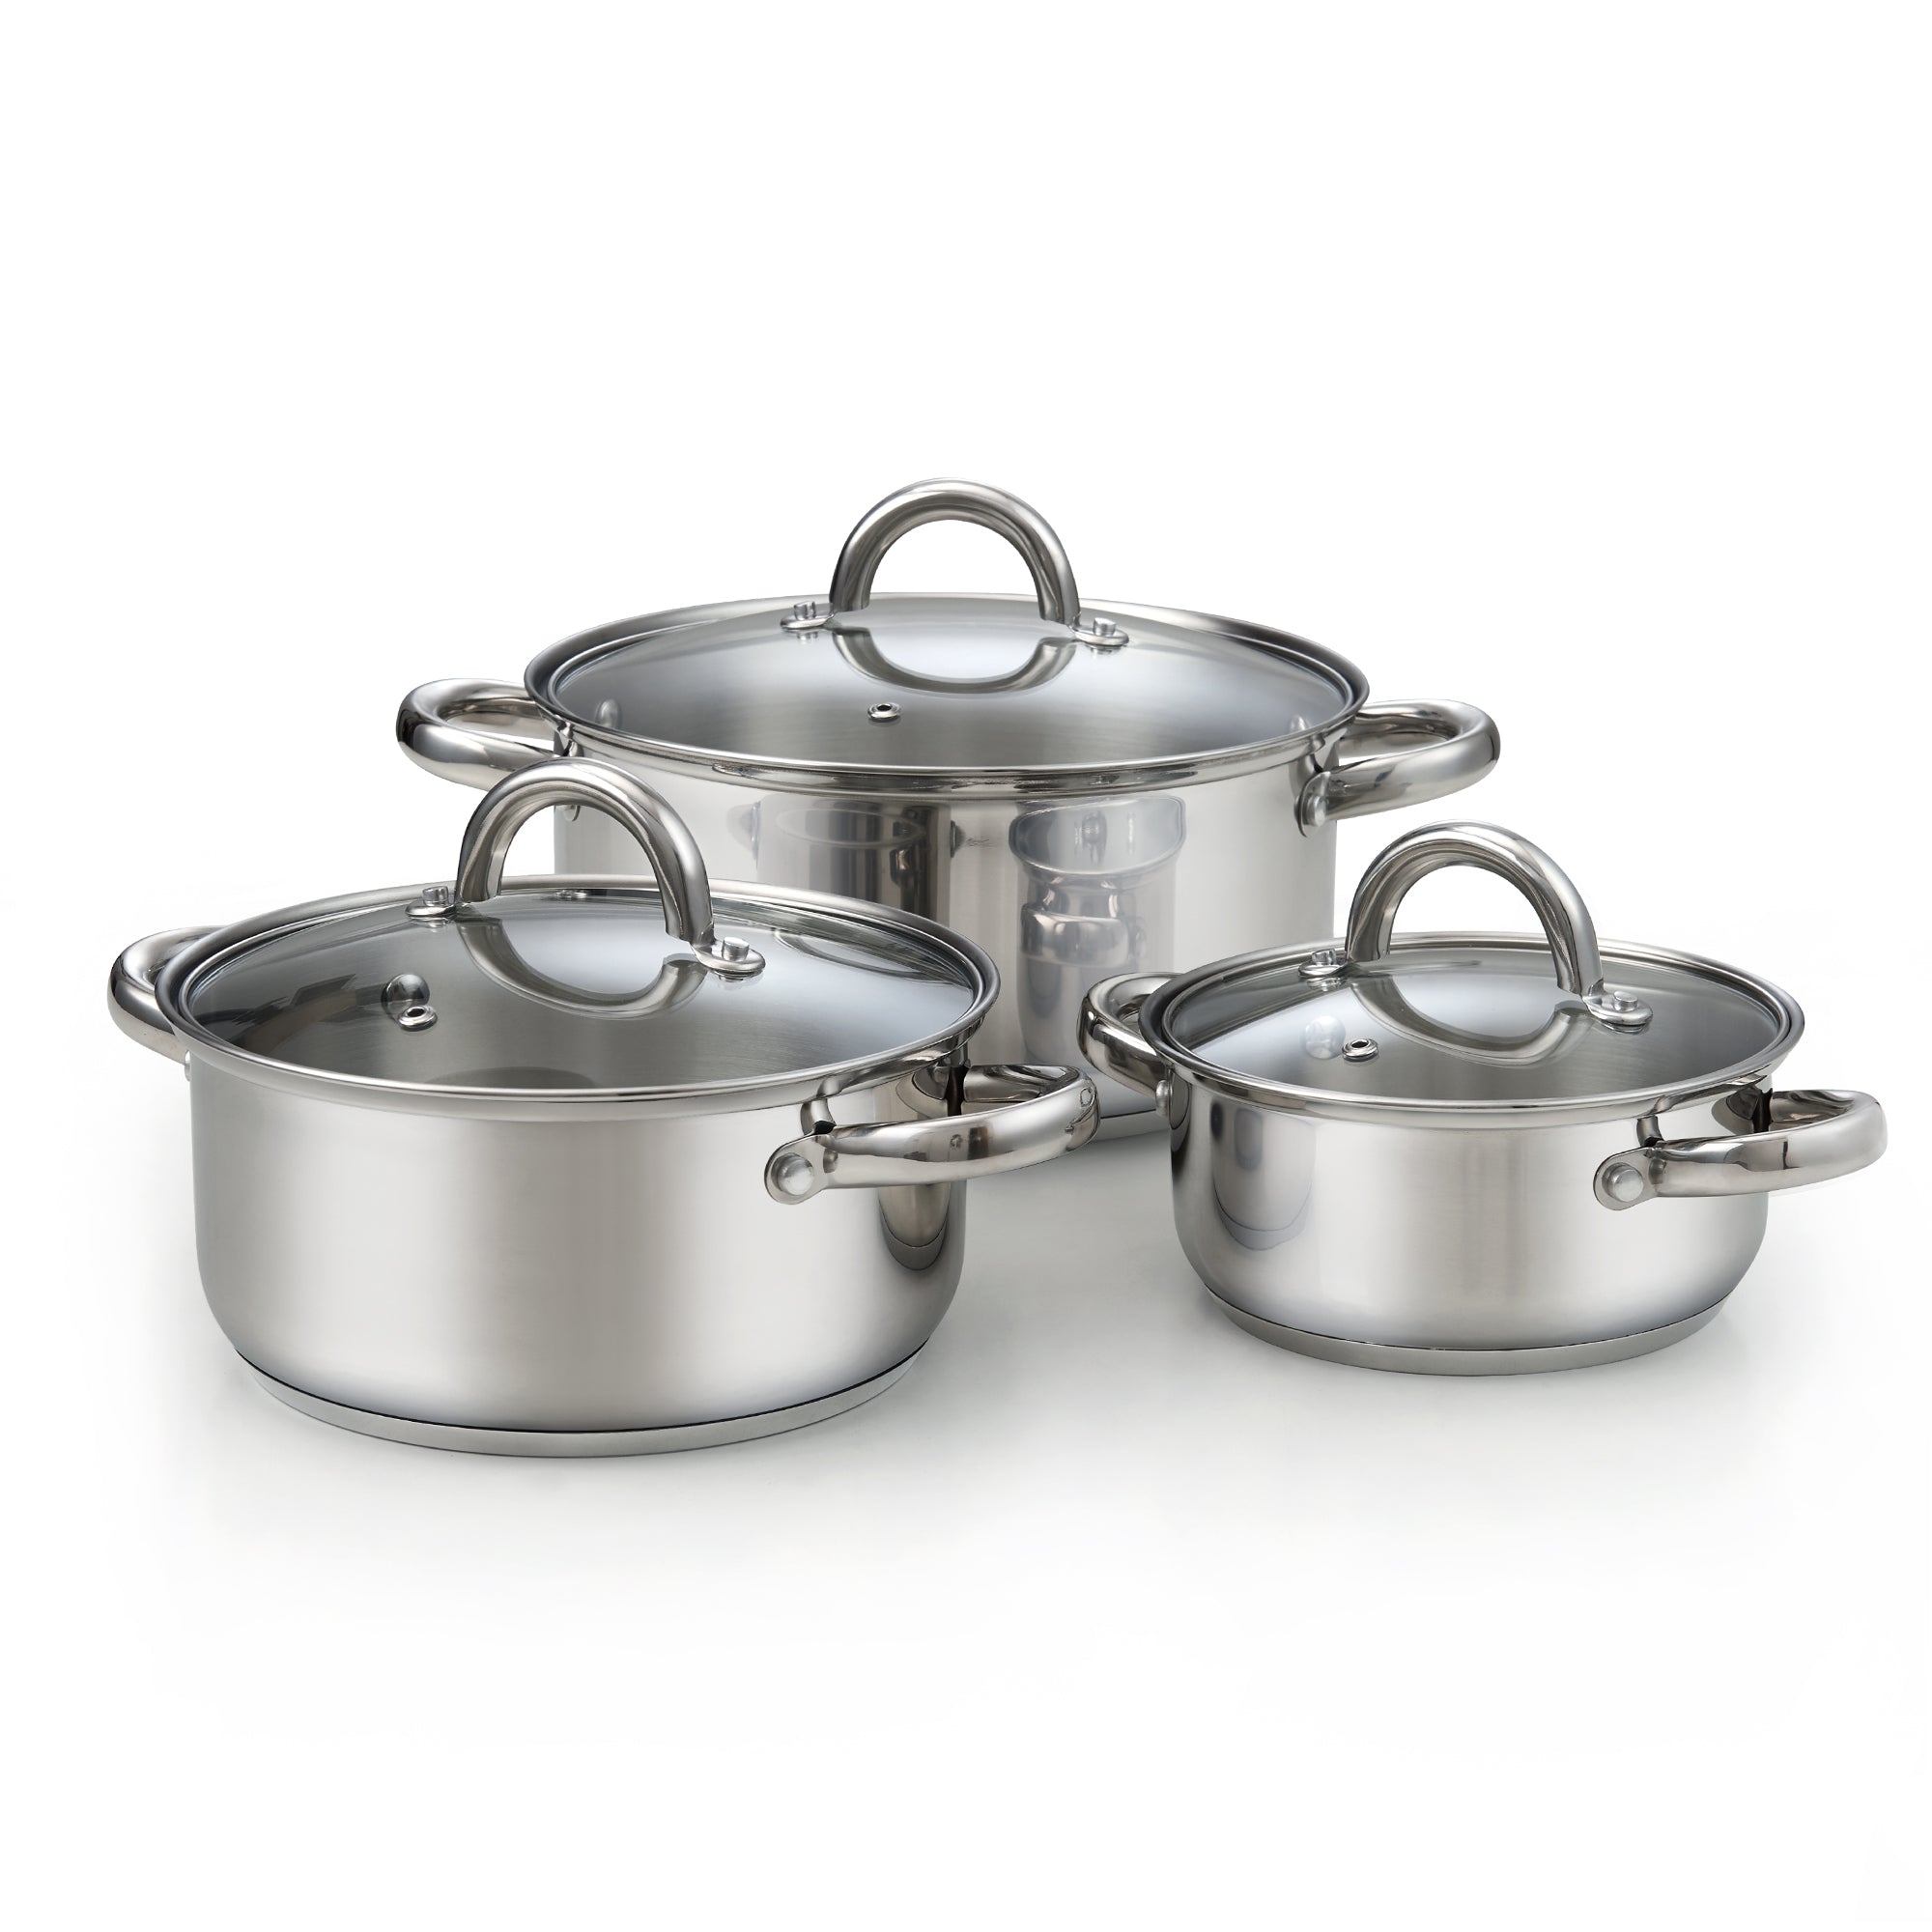 Cook N Home 8 Quart Stainless Steel Stockpot Saucepot with Lid